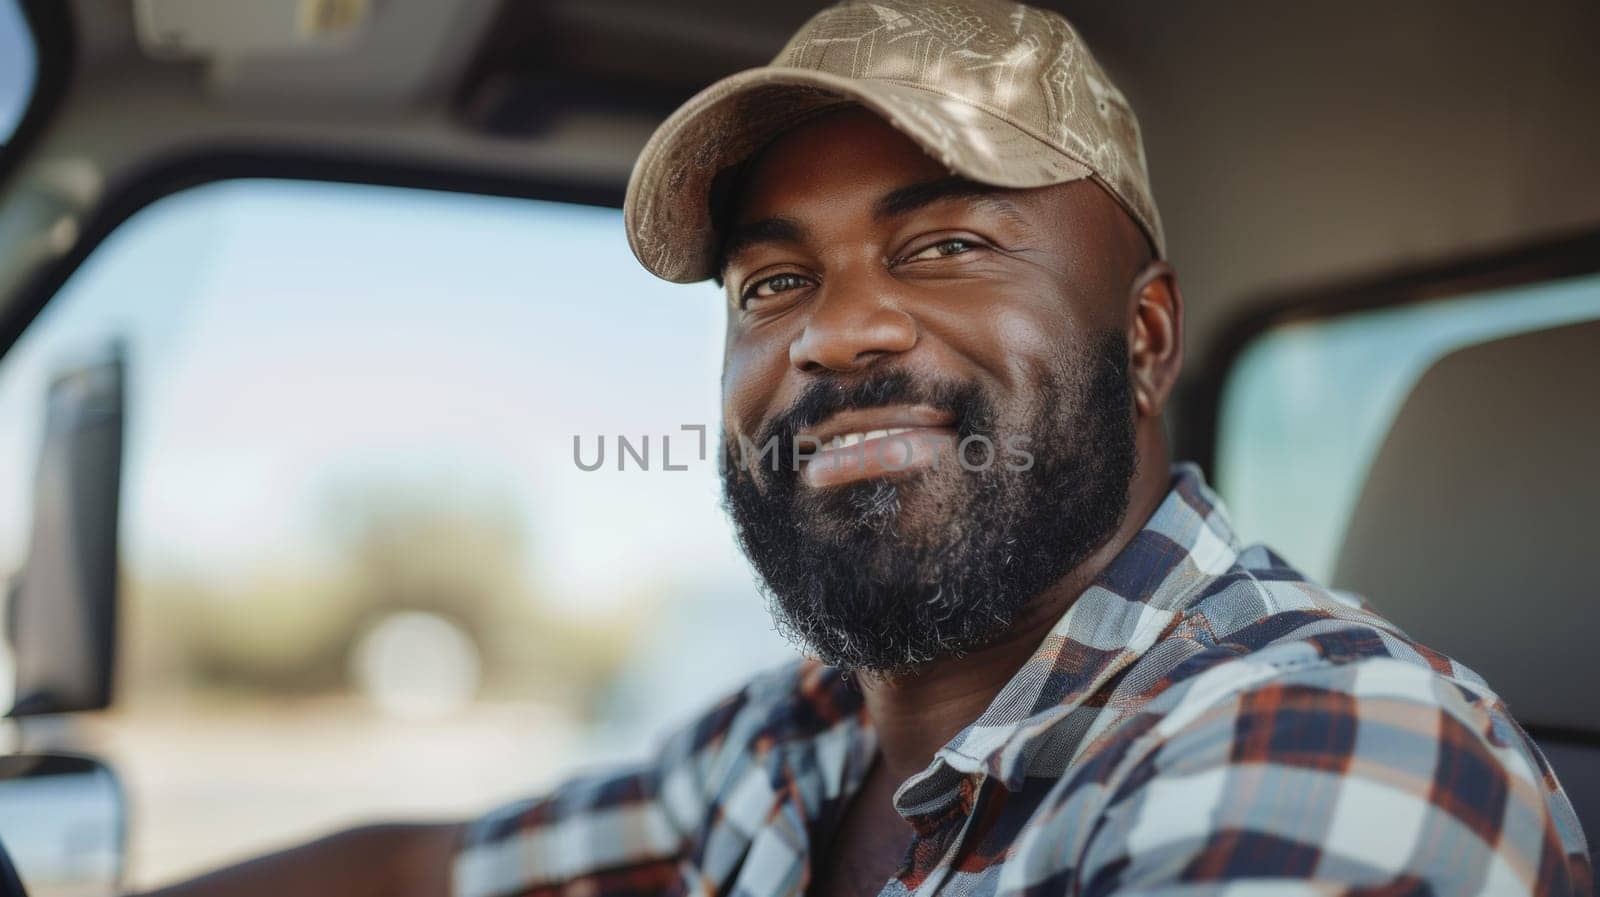 A man in a truck smiling and wearing a hat, AI by starush